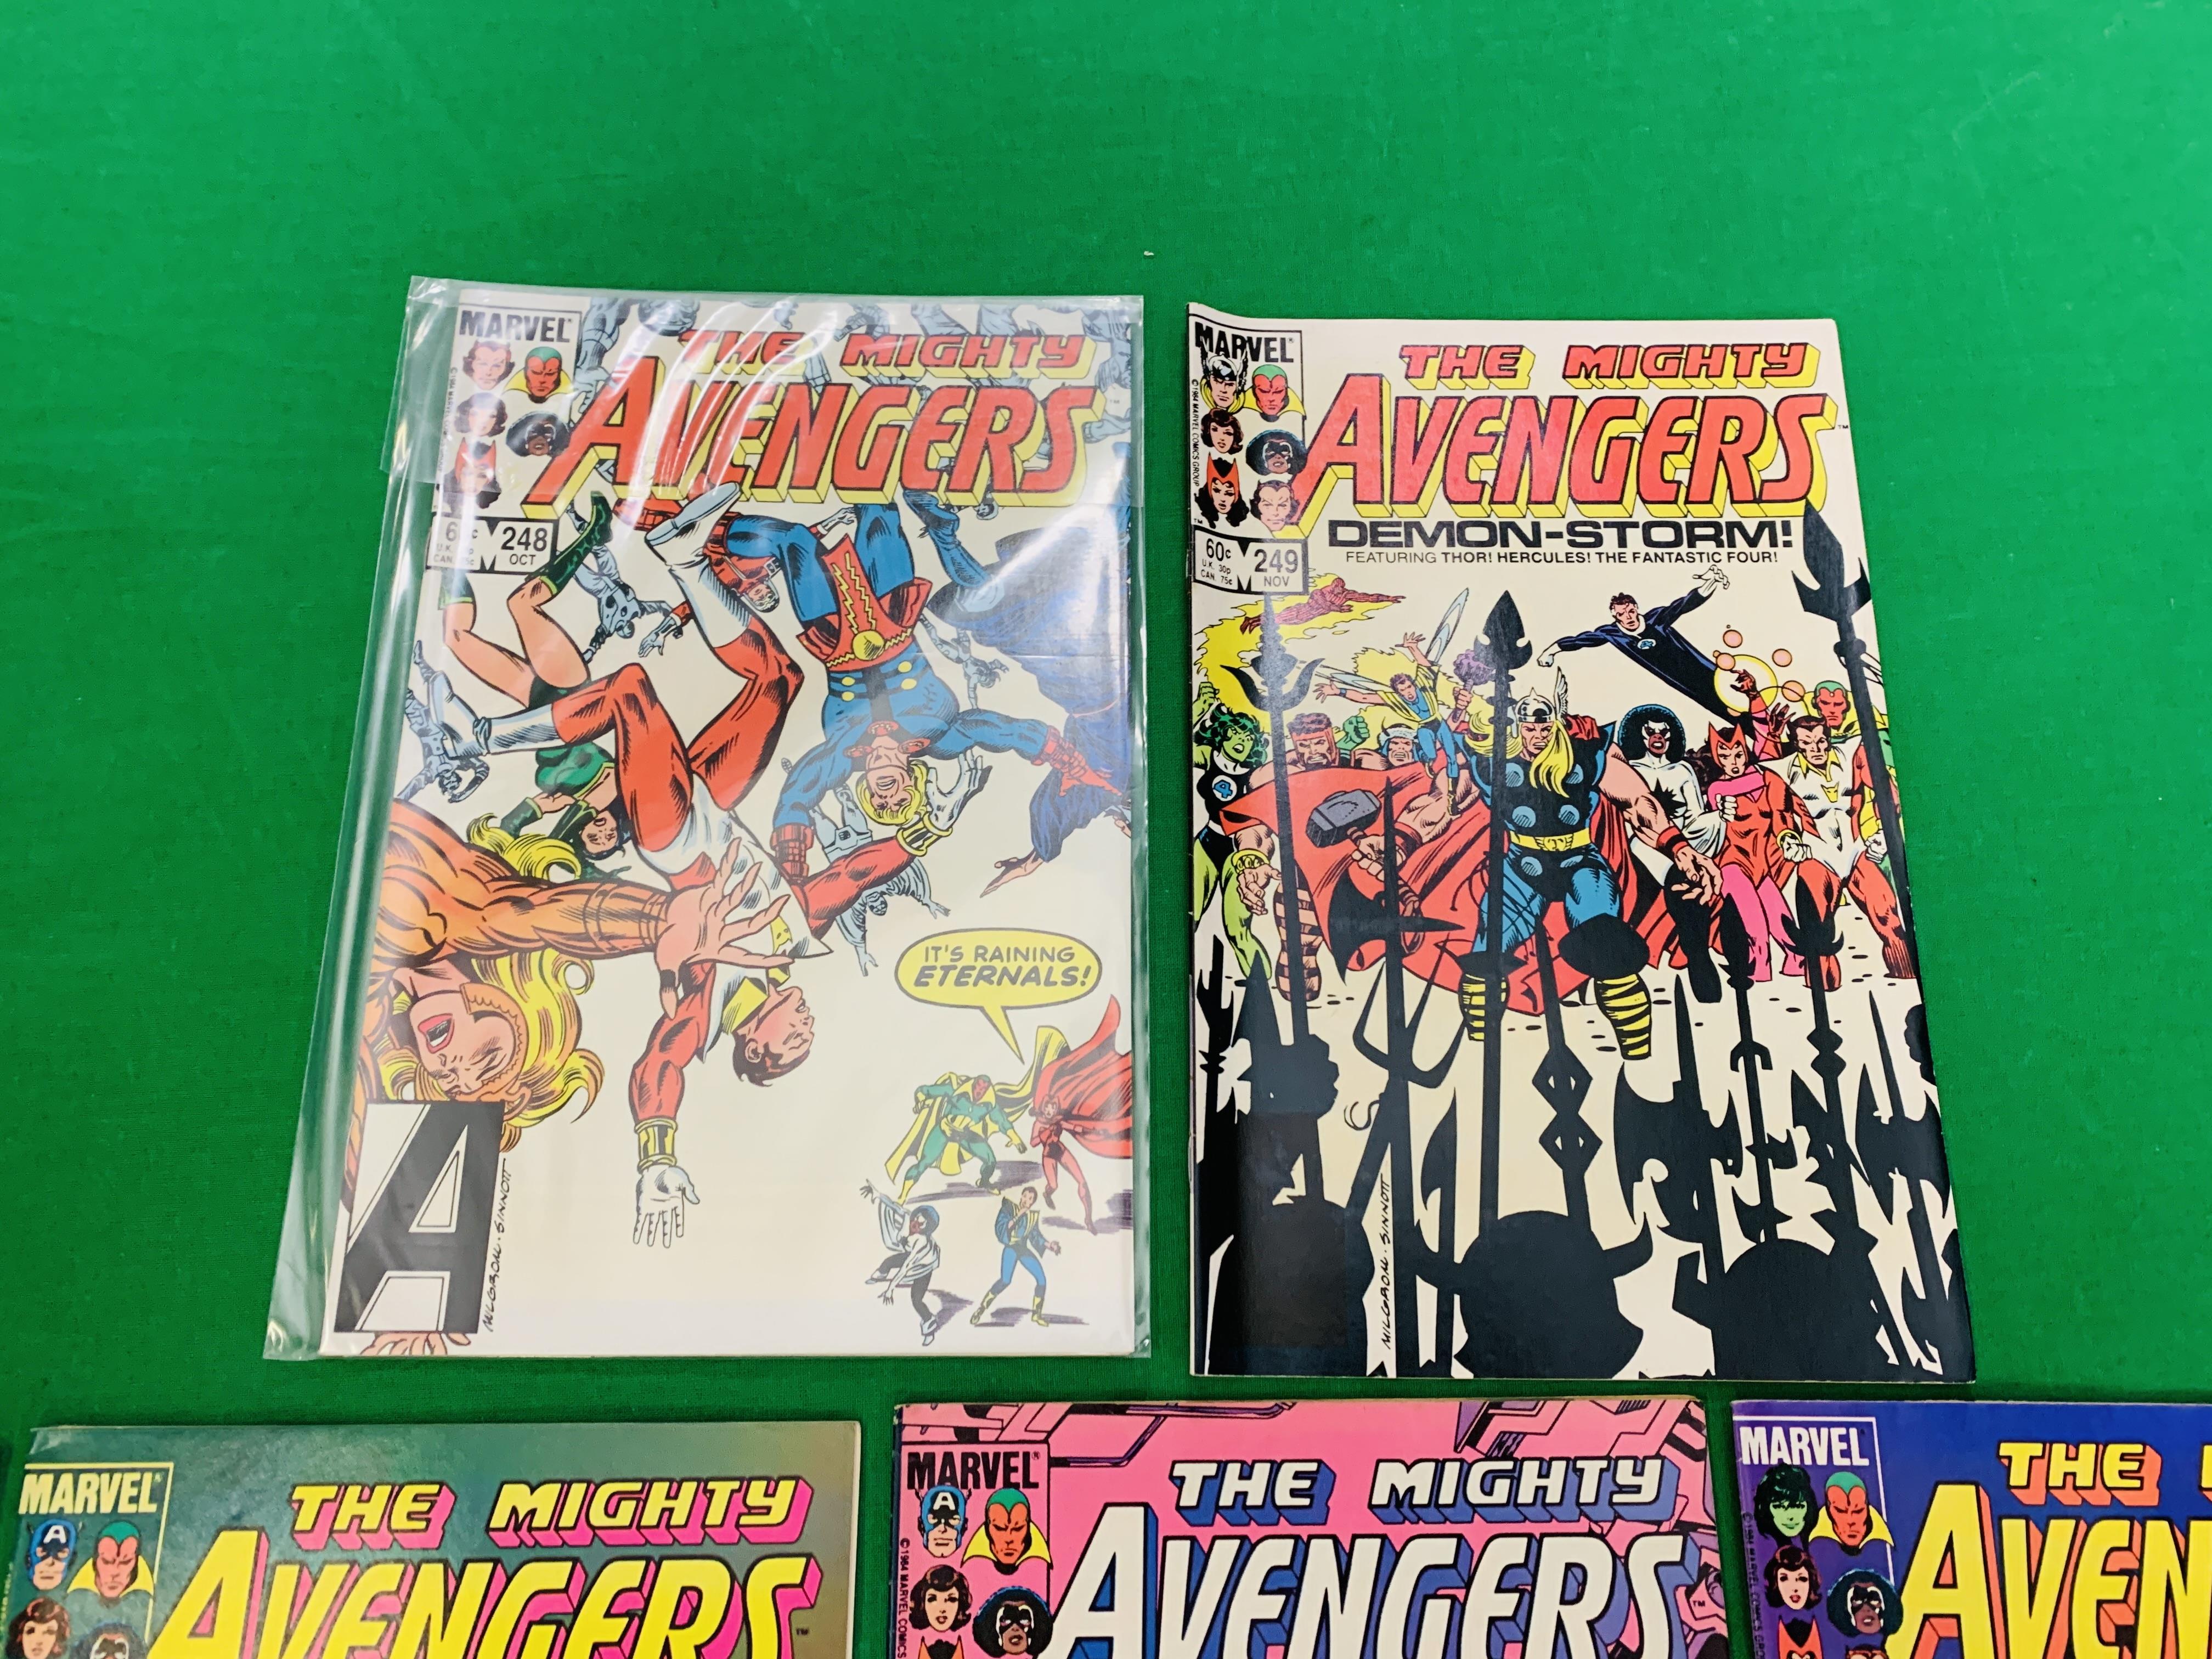 MARVEL COMICS THE AVENGERS NO. 101 - 299, MISSING ISSUES 103 AND 110. - Image 103 of 130